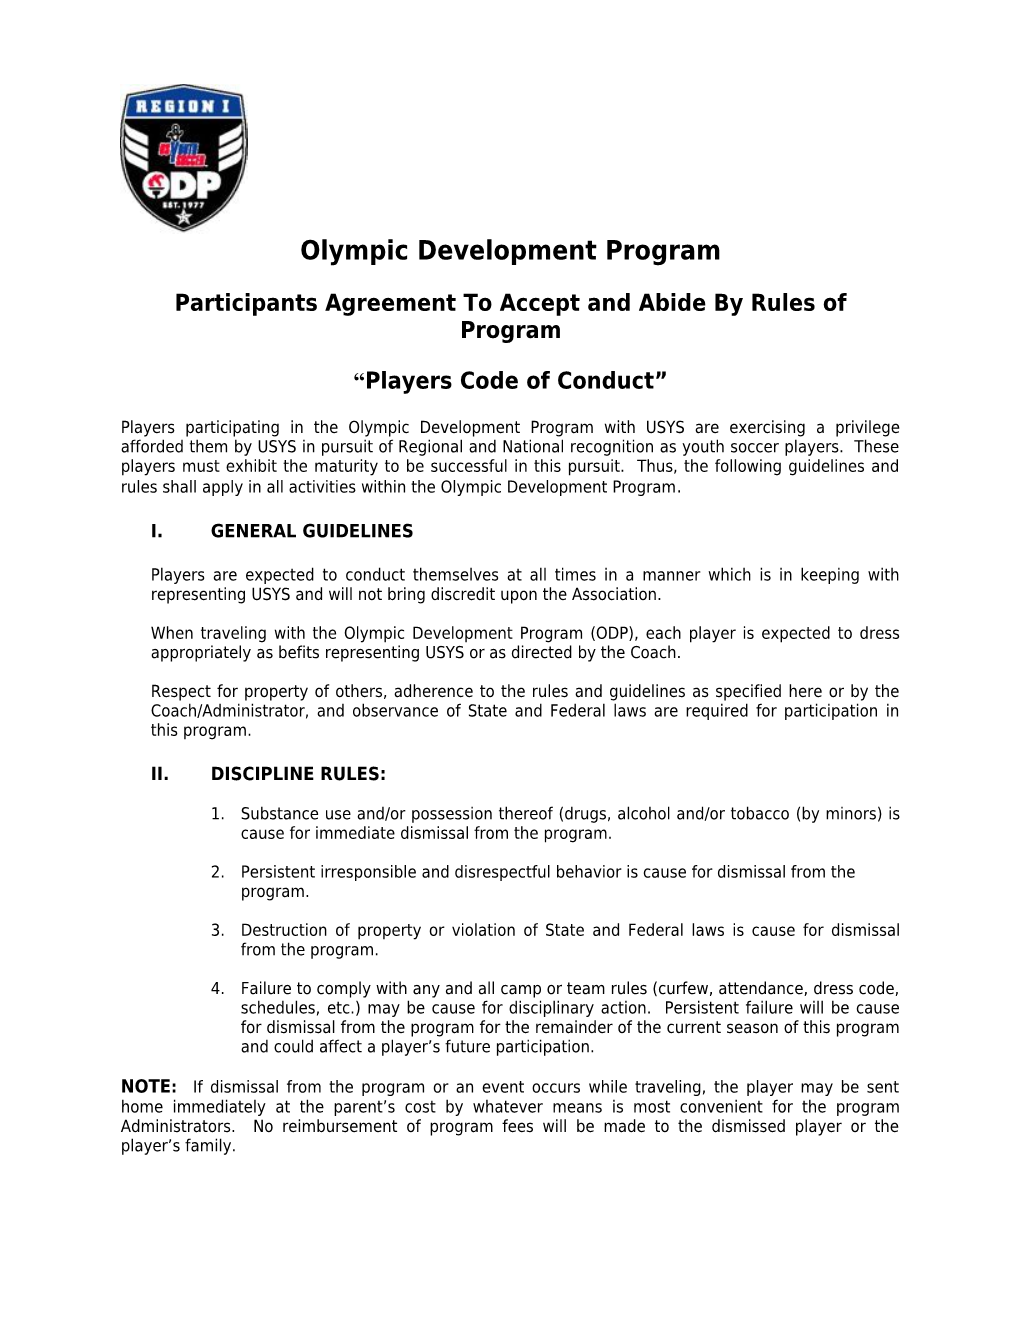 Participants Agreement to Accept and Abide by Rules of Program